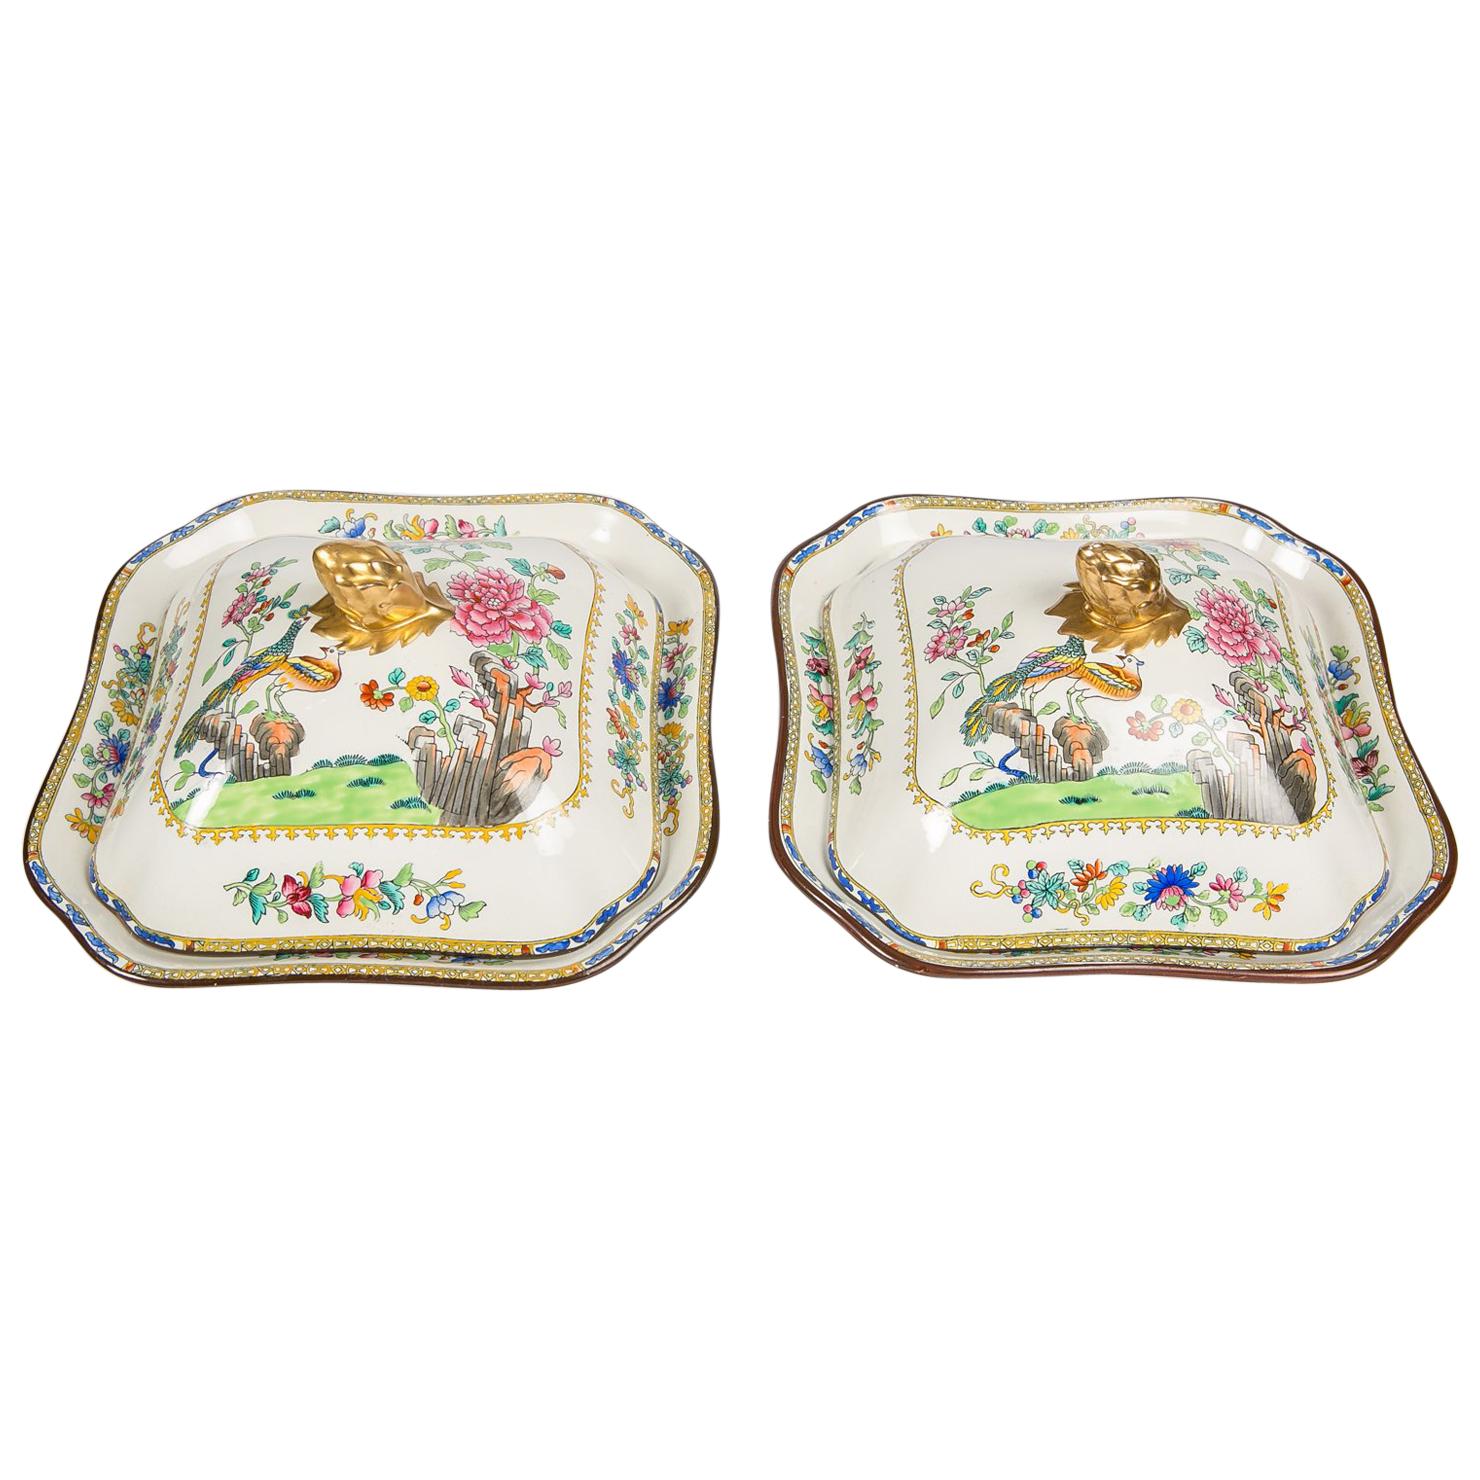 Pair of Chinoiserie Covered Dishes Made in England circa 1850